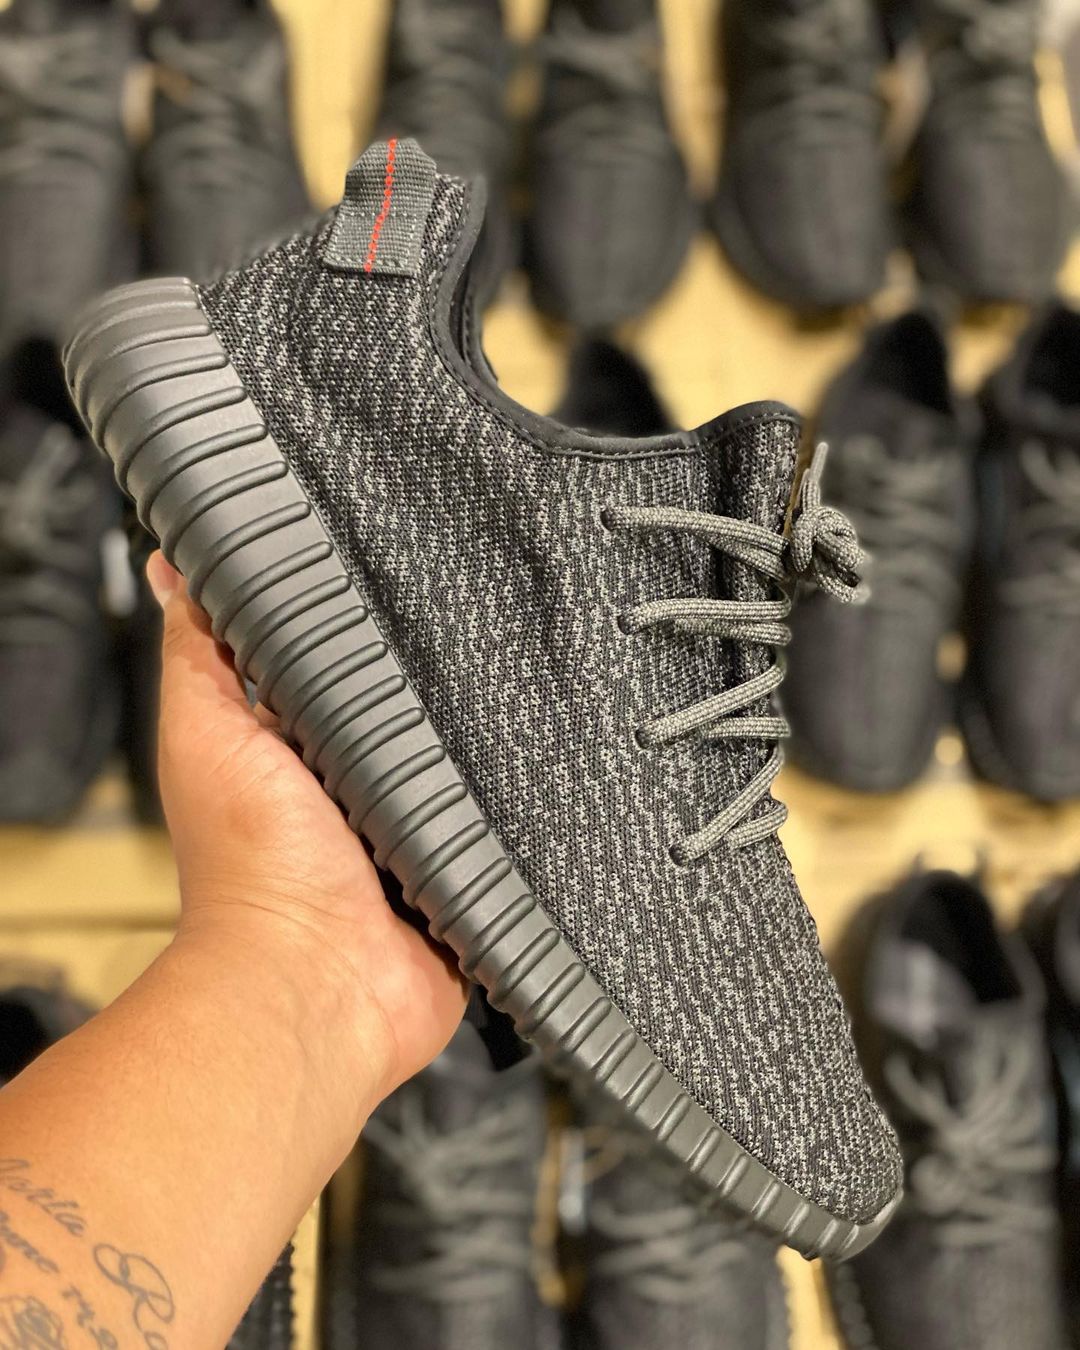 The adidas Yeezy Boost 350 